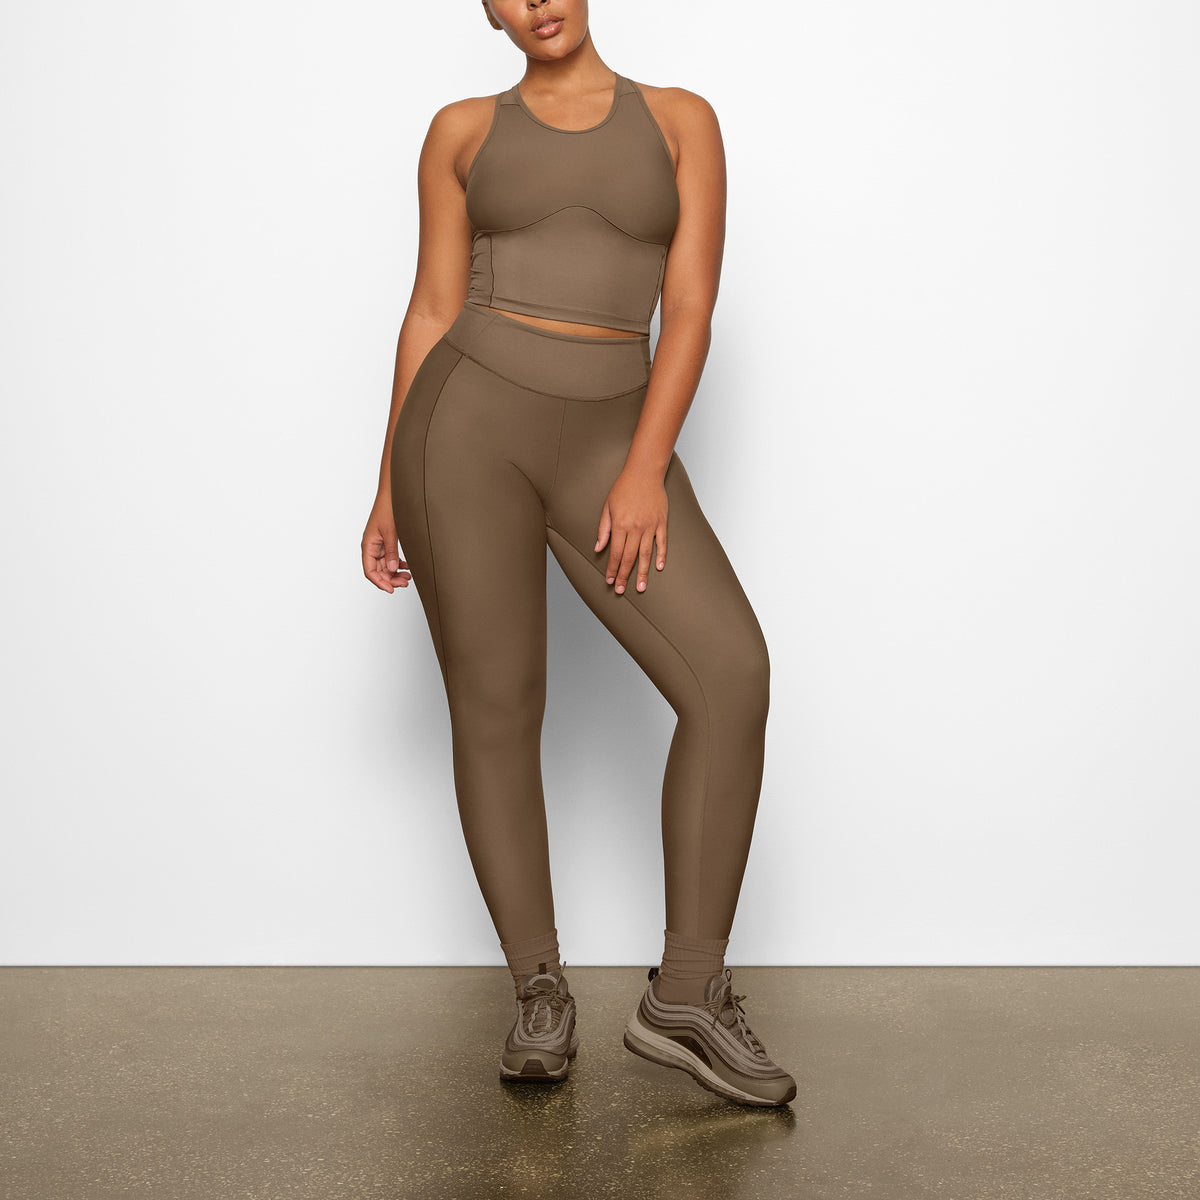 SKIMS launches Performance Collection: Shop new leggings, tanks